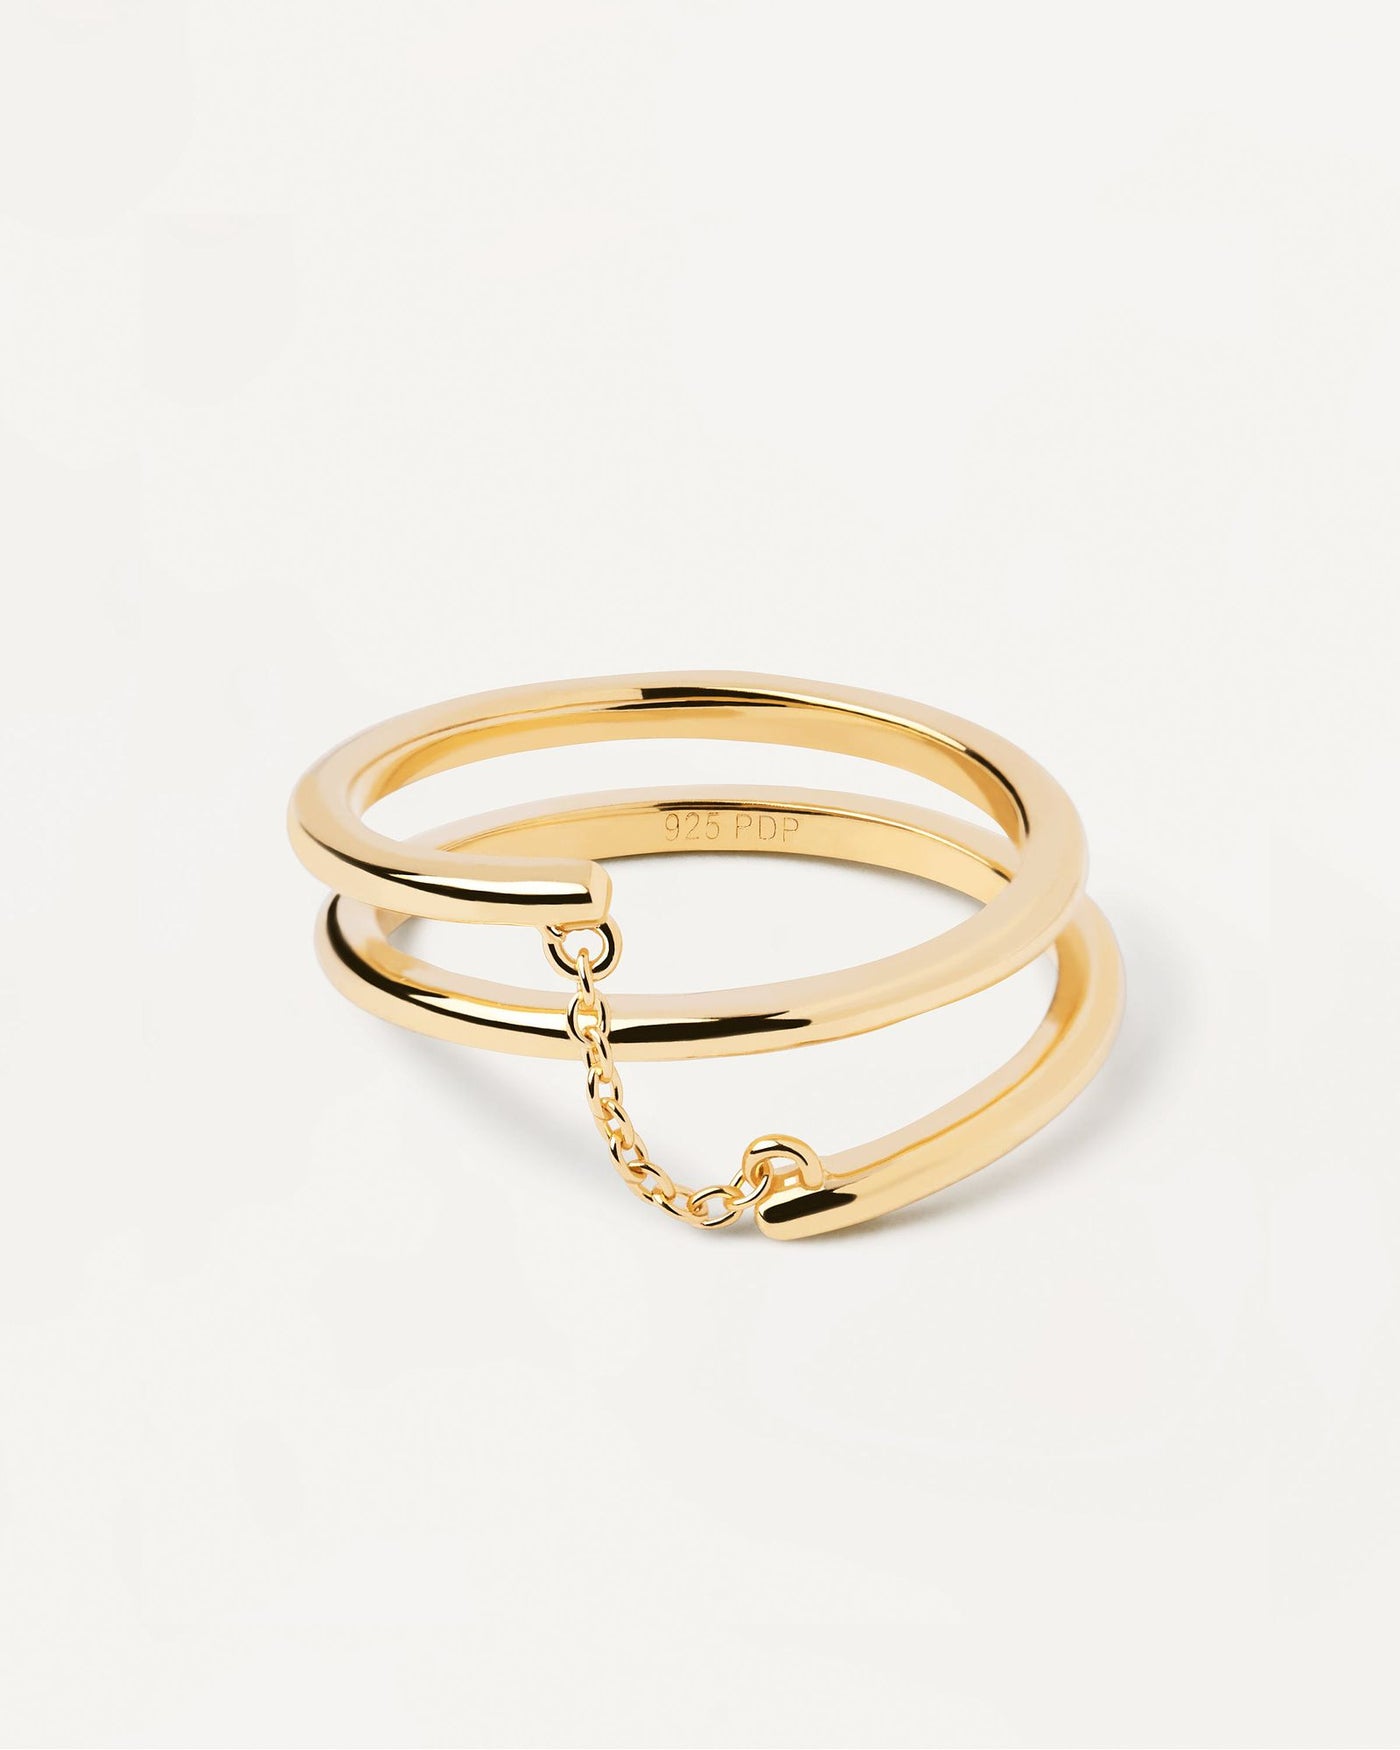 2024 Selection | Giro Ring. Gold-plated silver ring with dainty chain in spiral shape. Get the latest arrival from PDPAOLA. Place your order safely and get this Best Seller. Free Shipping.